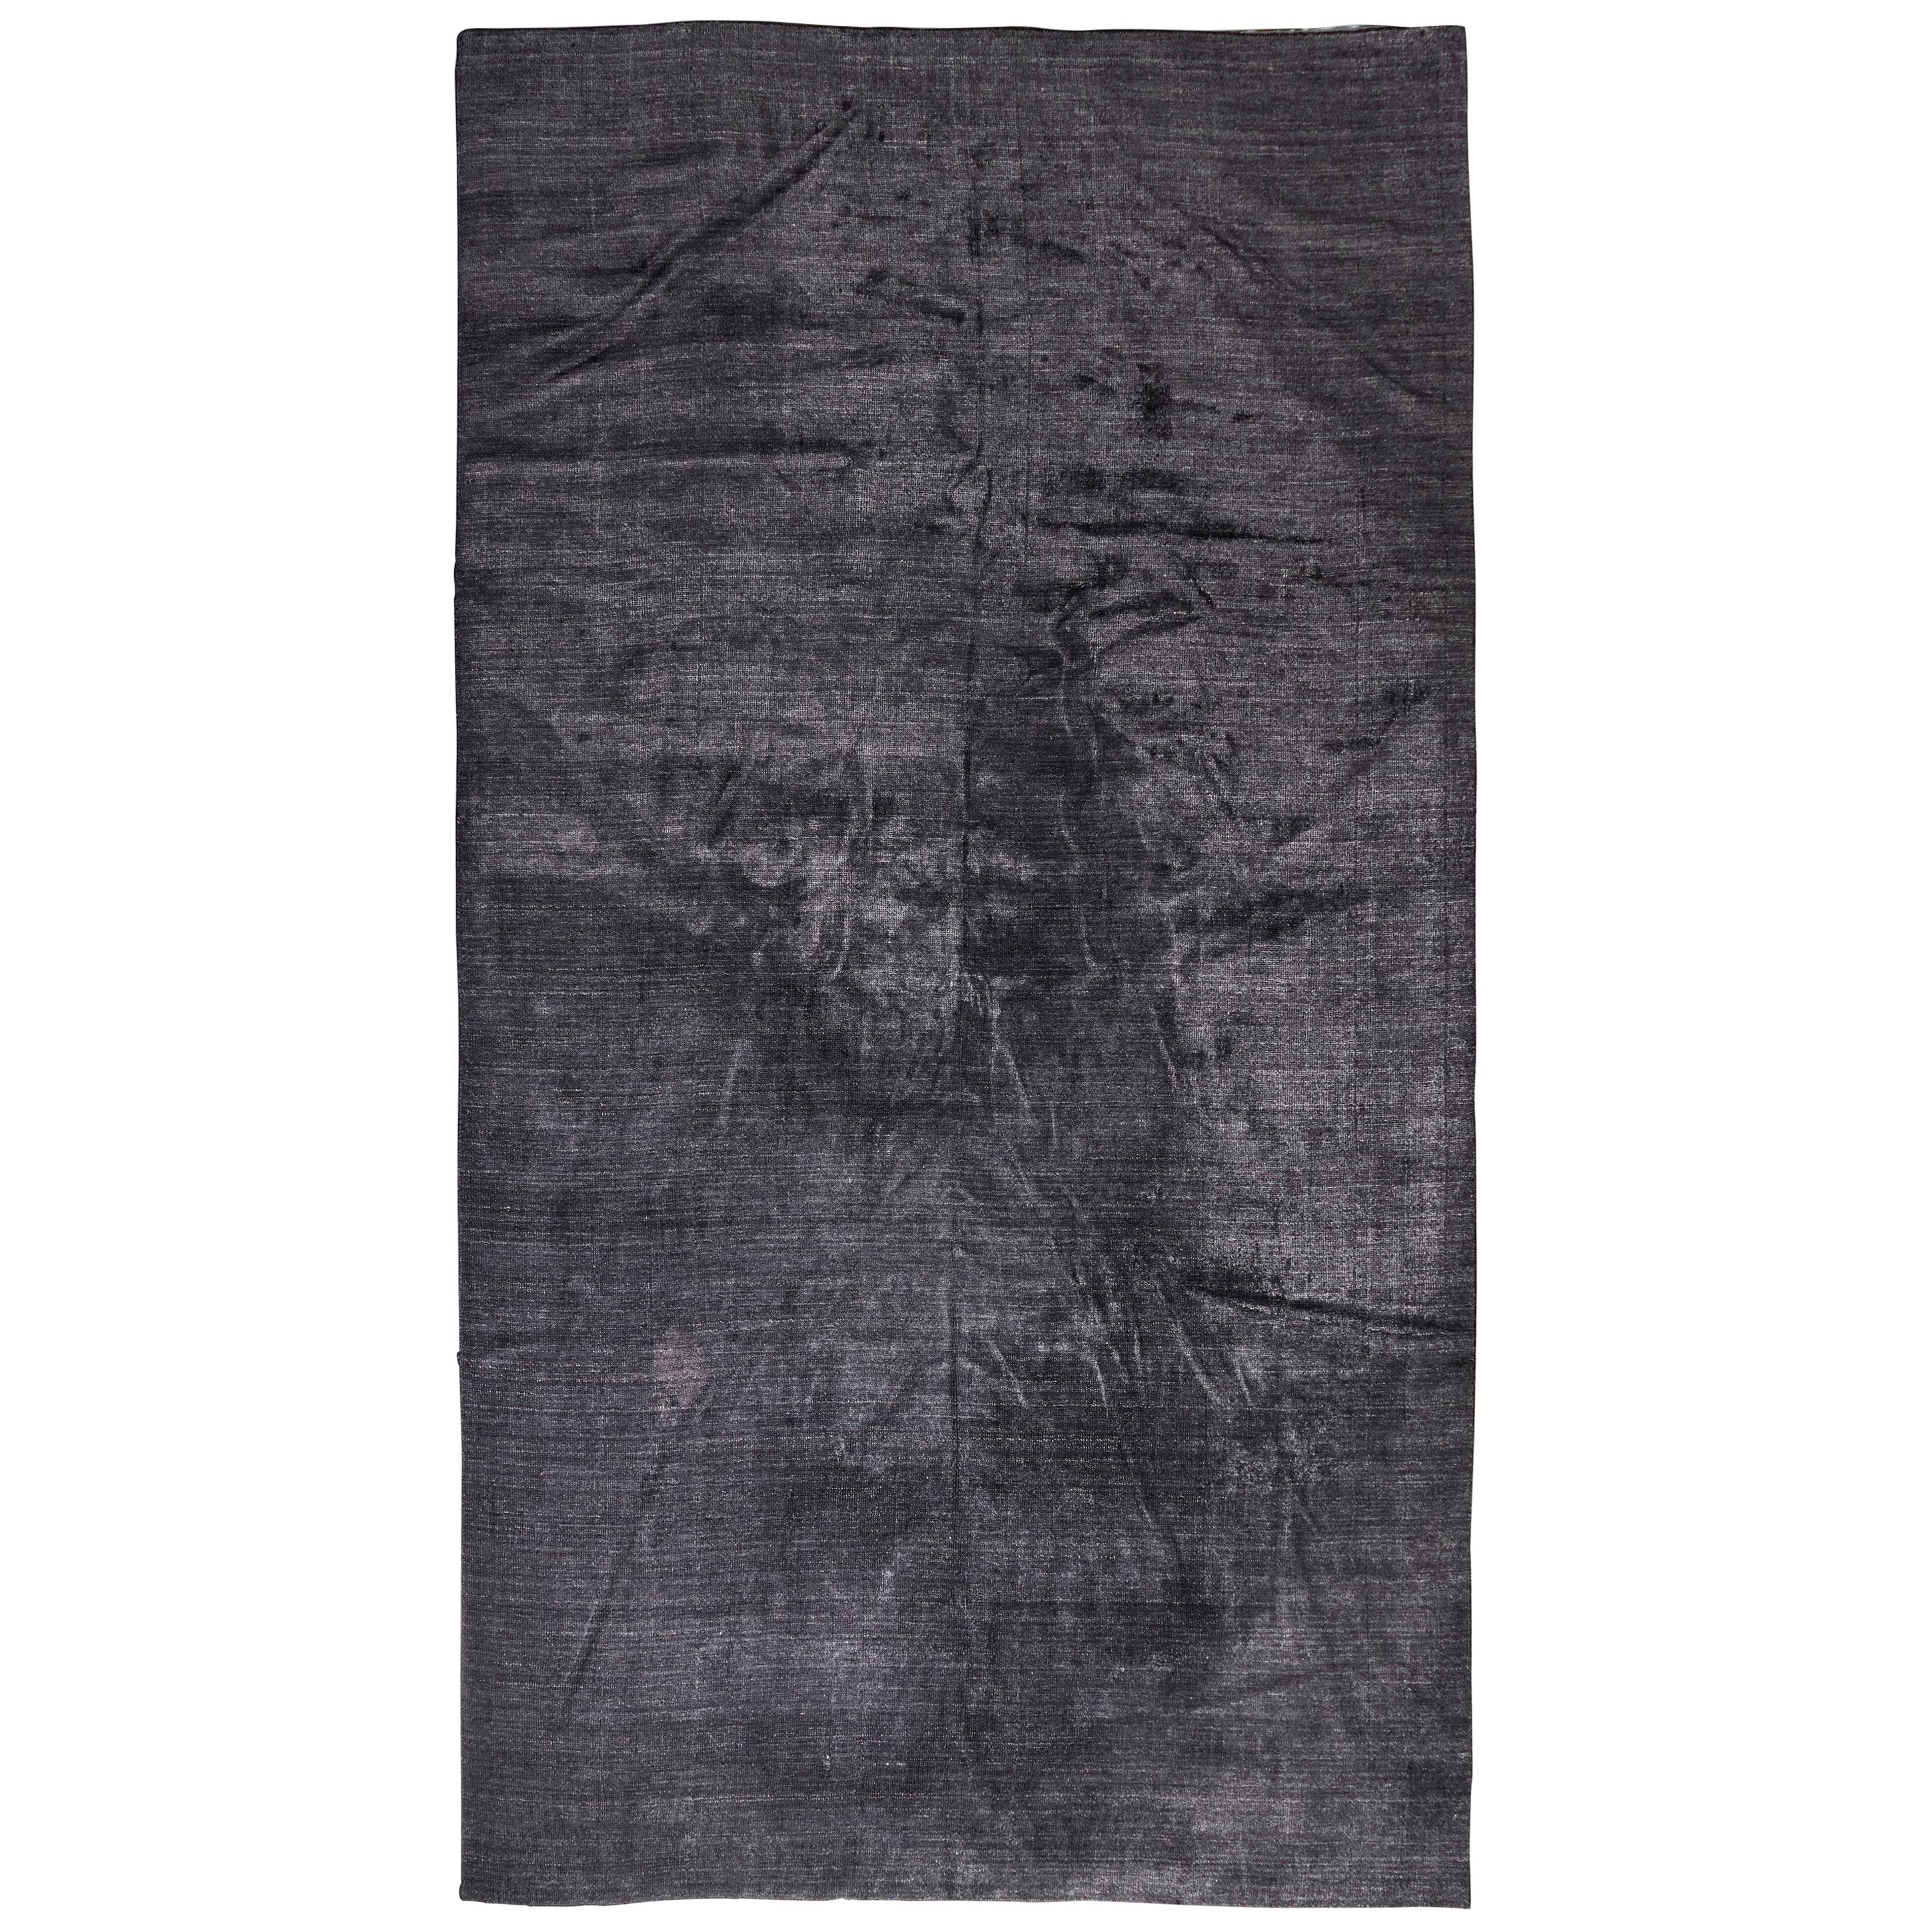 Room Size Indian Wool/Viscose Charcoal Area Rug